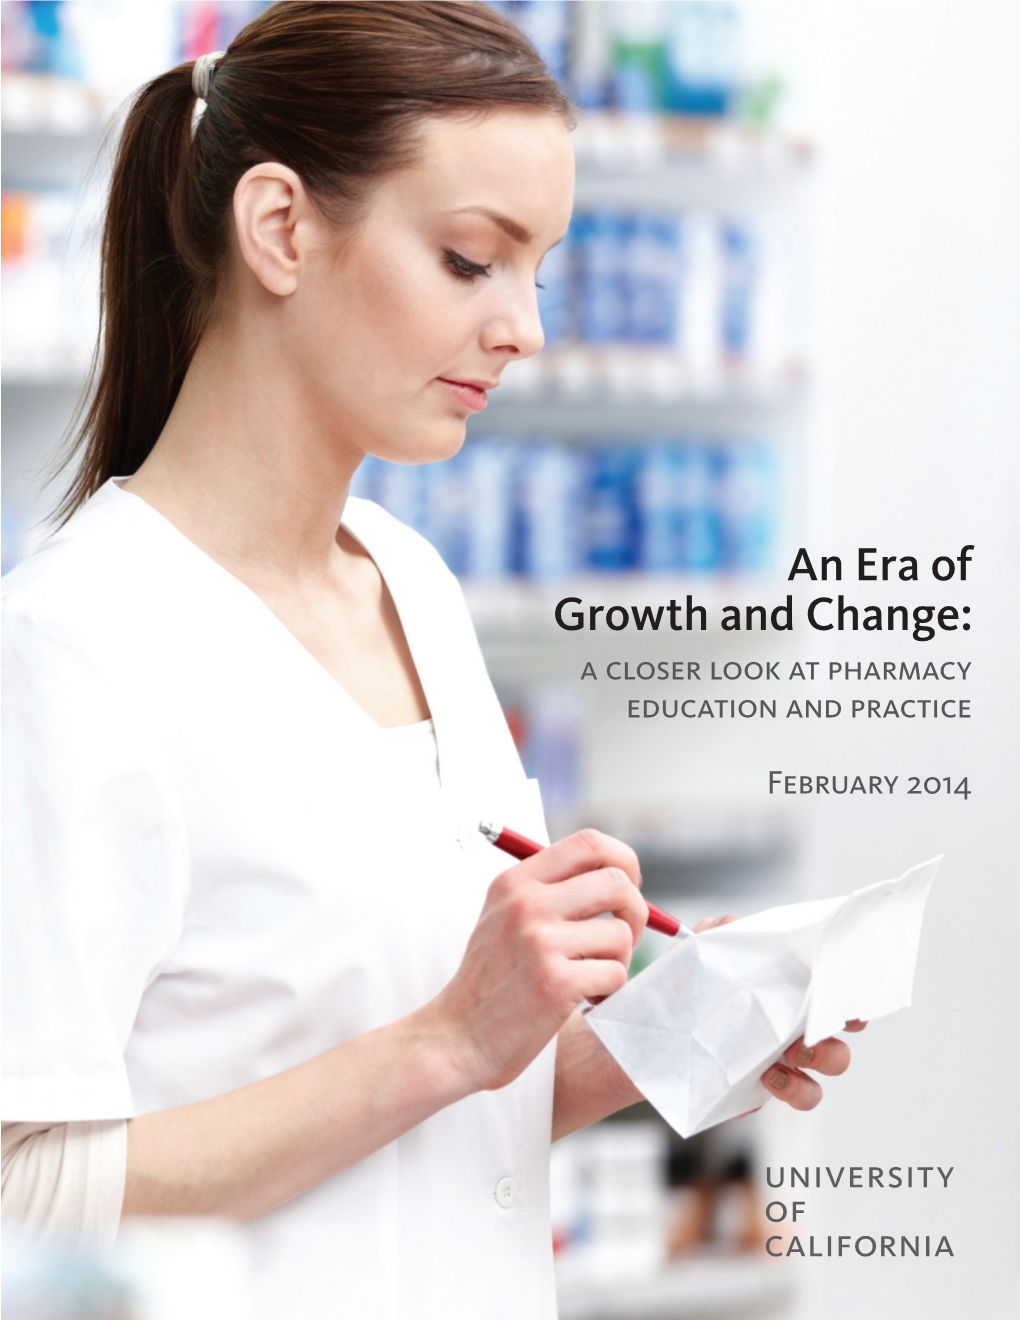 An Era of Growth and Change: a Closer Look at Pharmacy Education and Practice